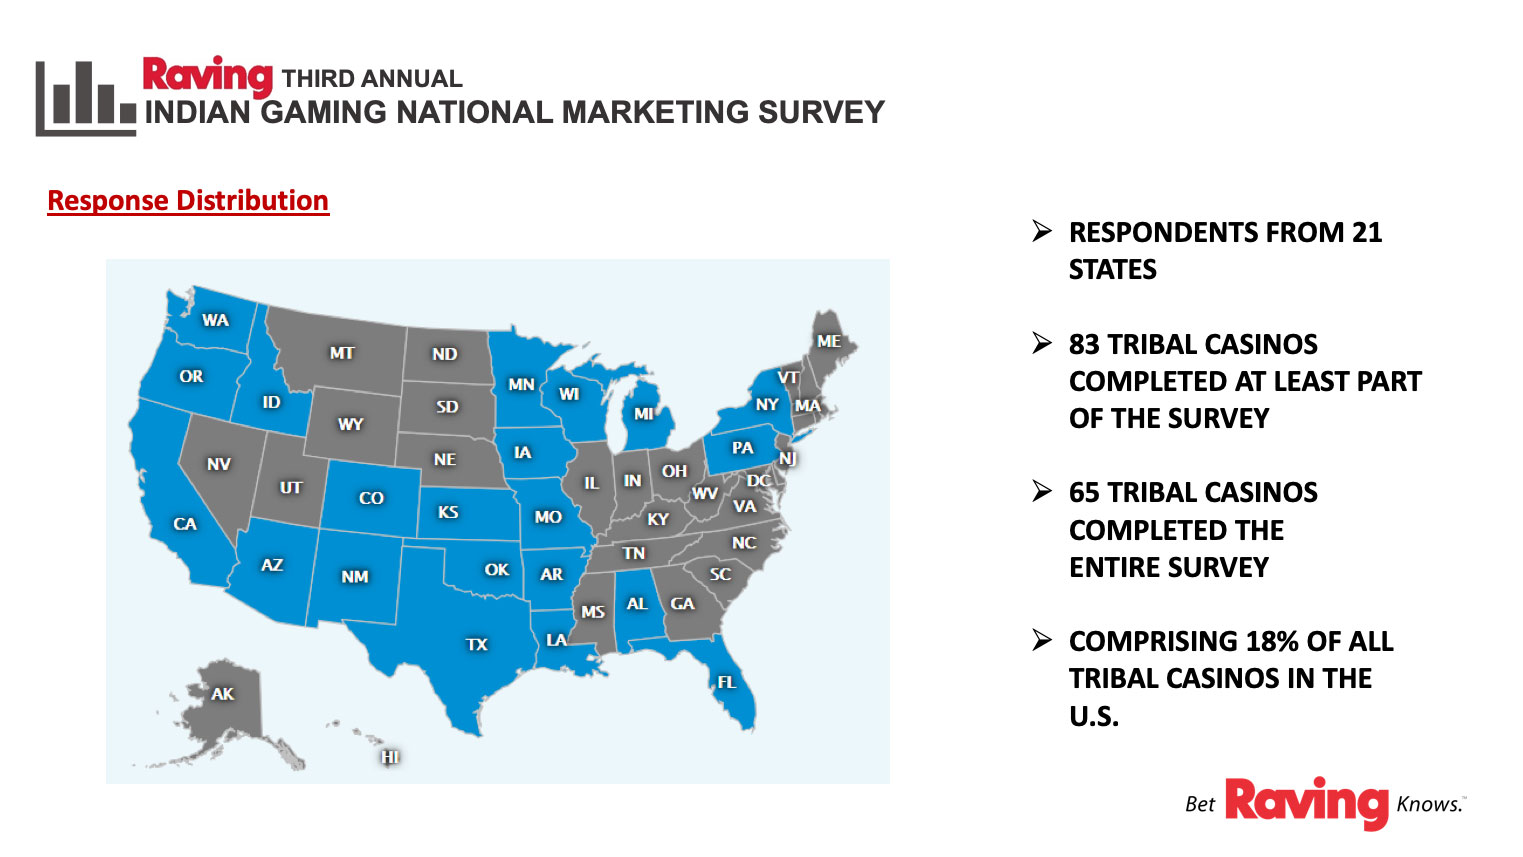 Indian gaming national marketing survey data results - participants by location